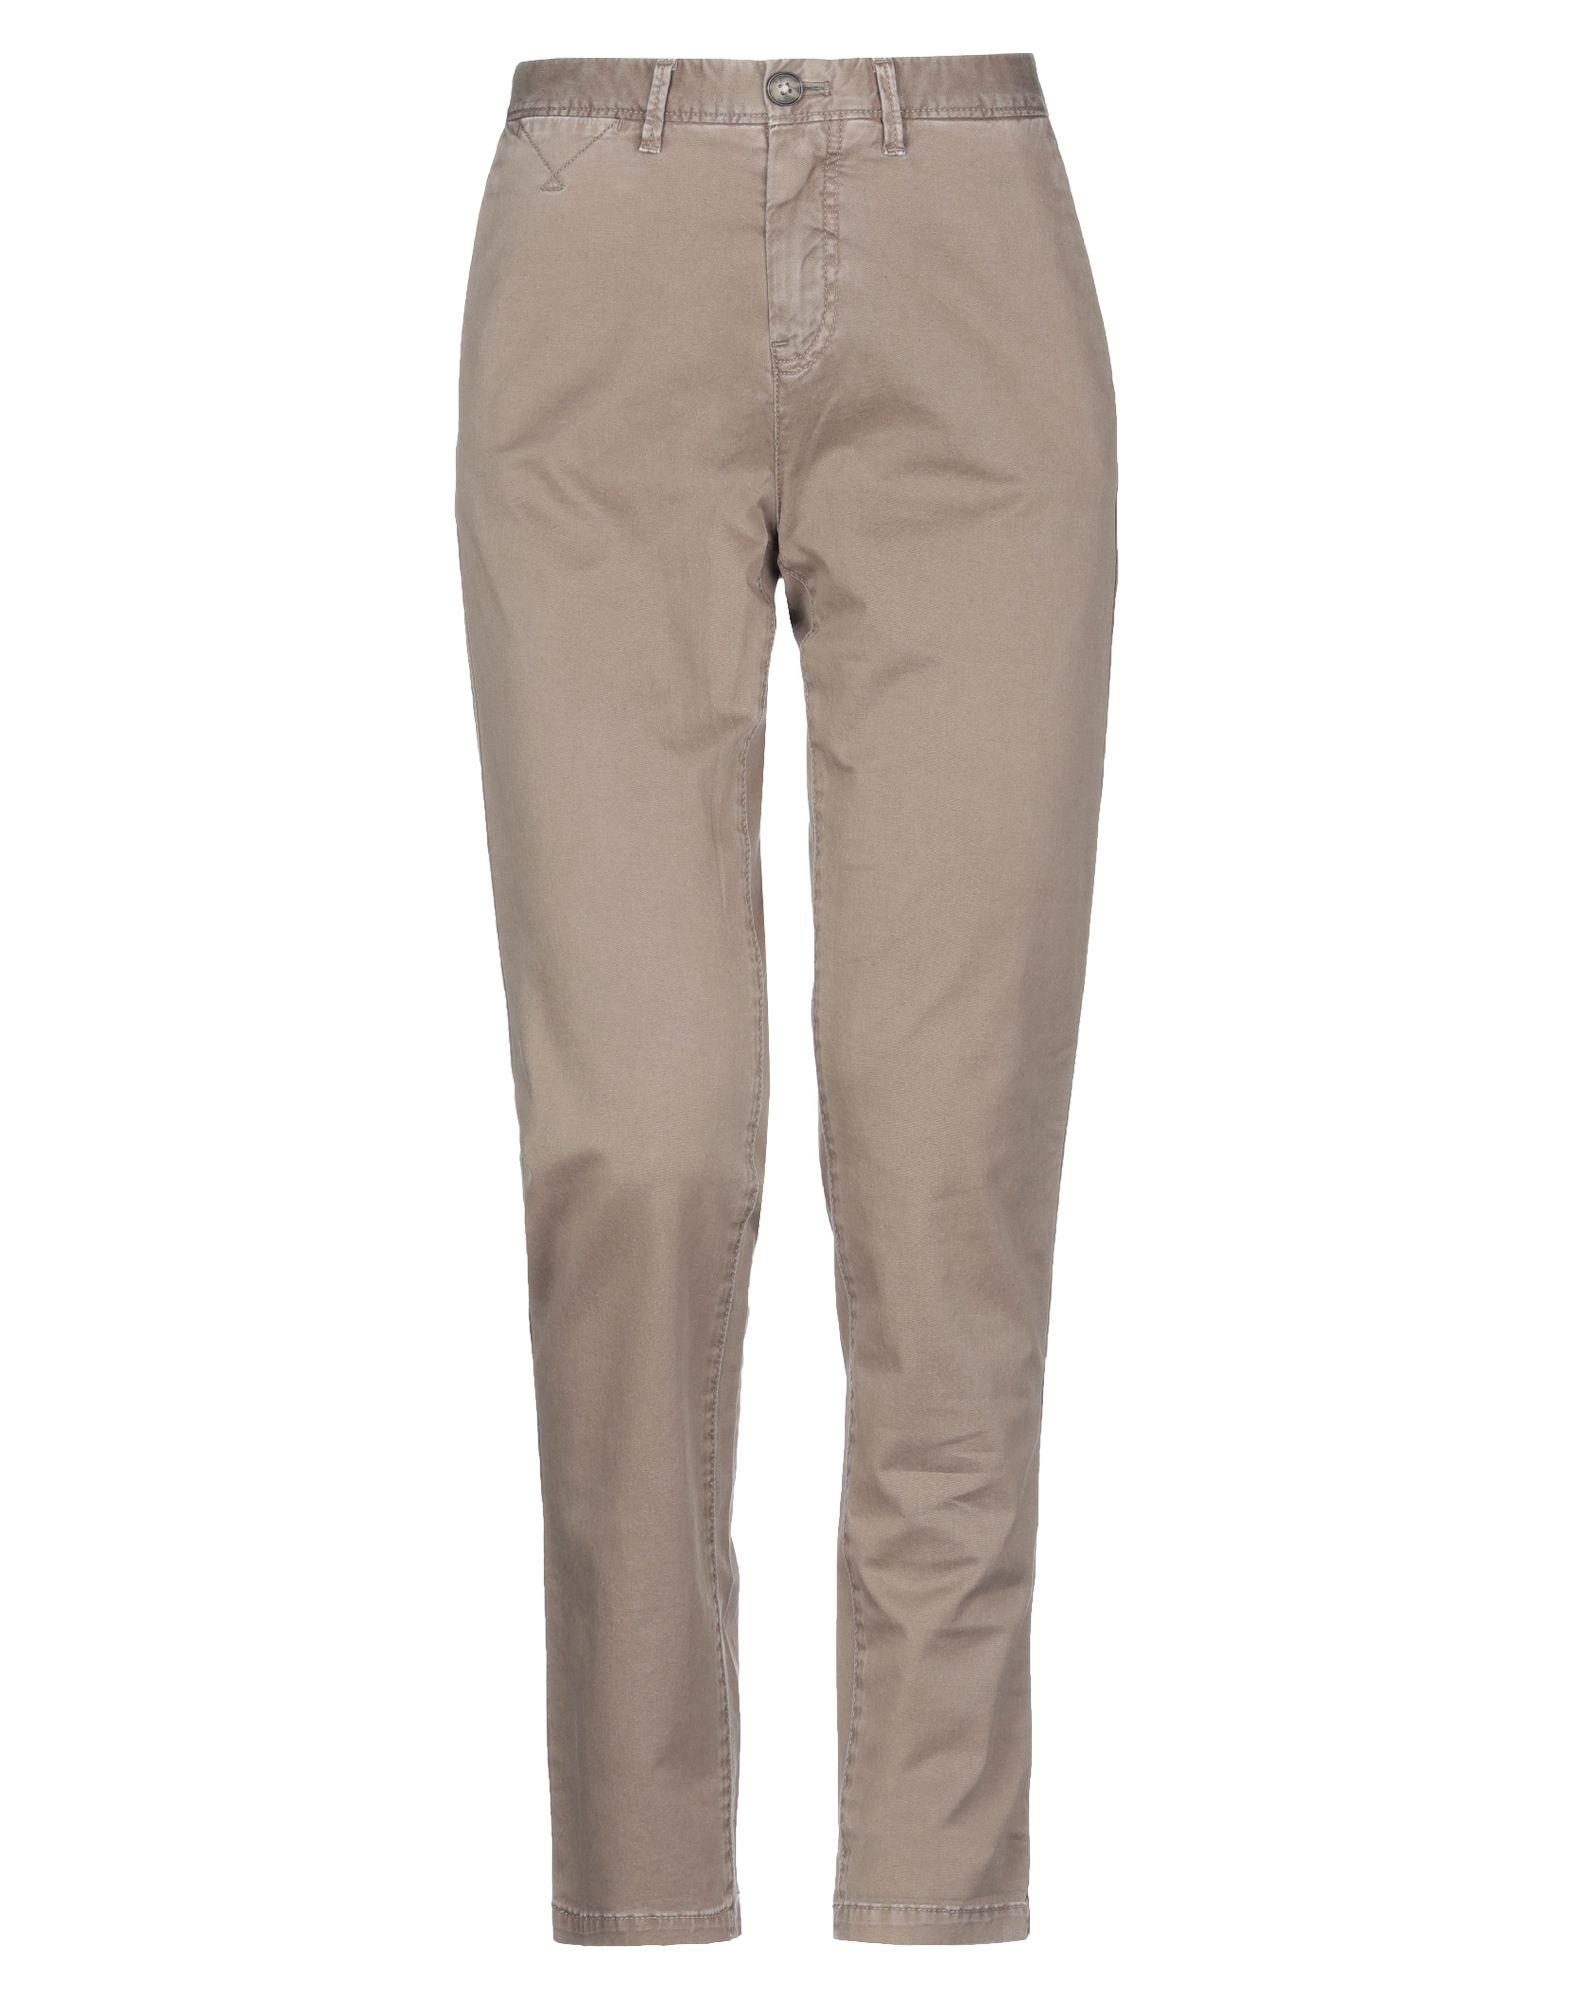 Tommy Hilfiger Cotton Casual Pants in Khaki (Natural) - Lyst